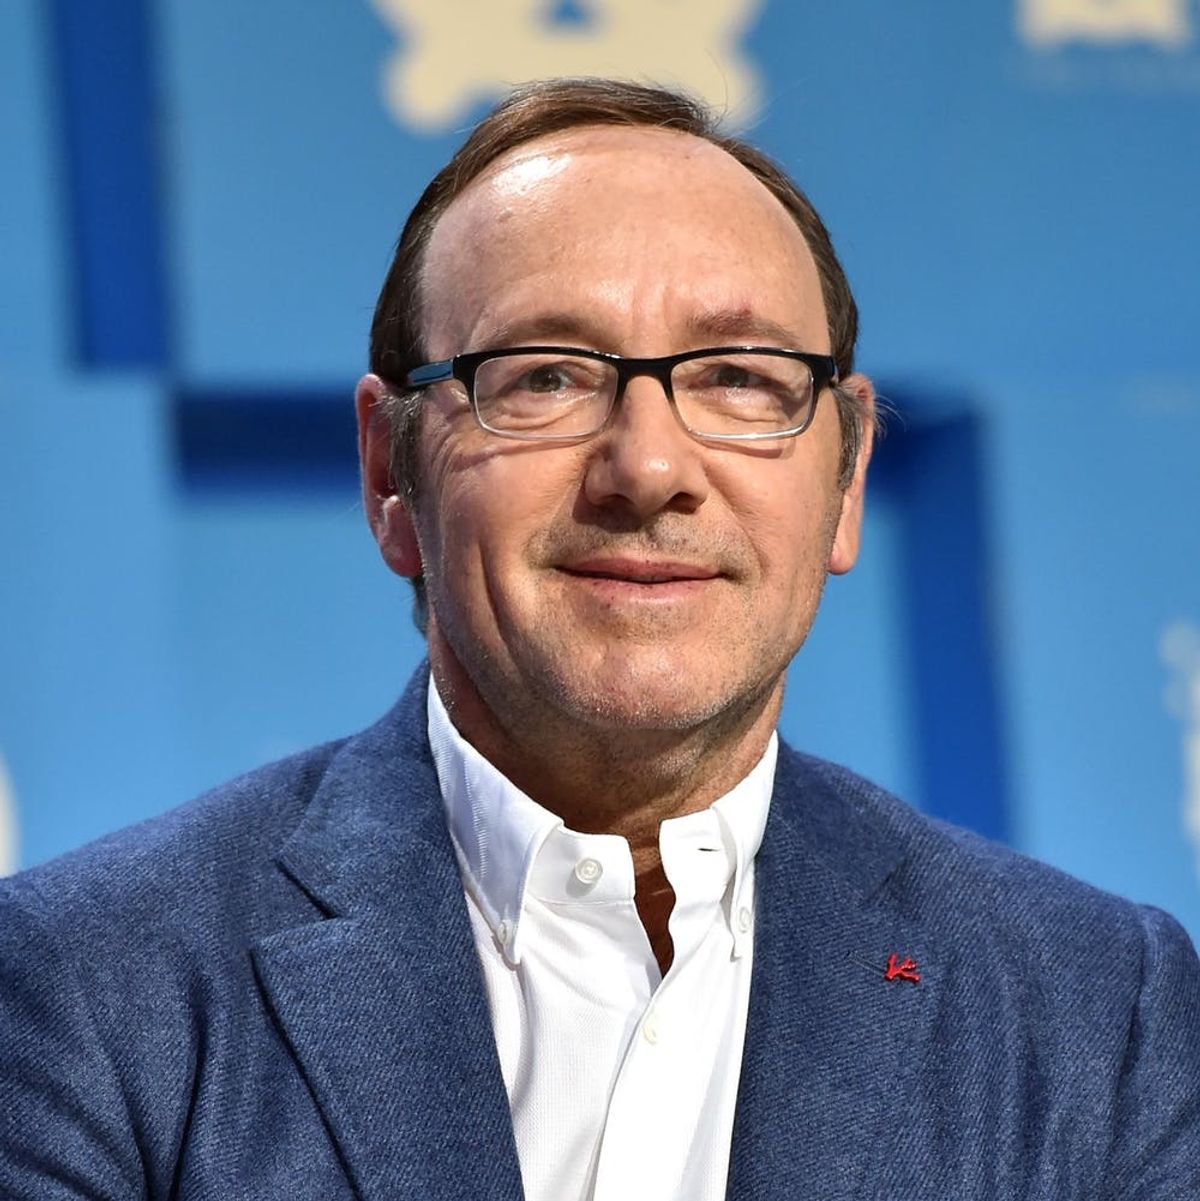 Kevin Spacey Comes Out As Gay After Actor Anthony Rapp Alleges Sexual Misconduct